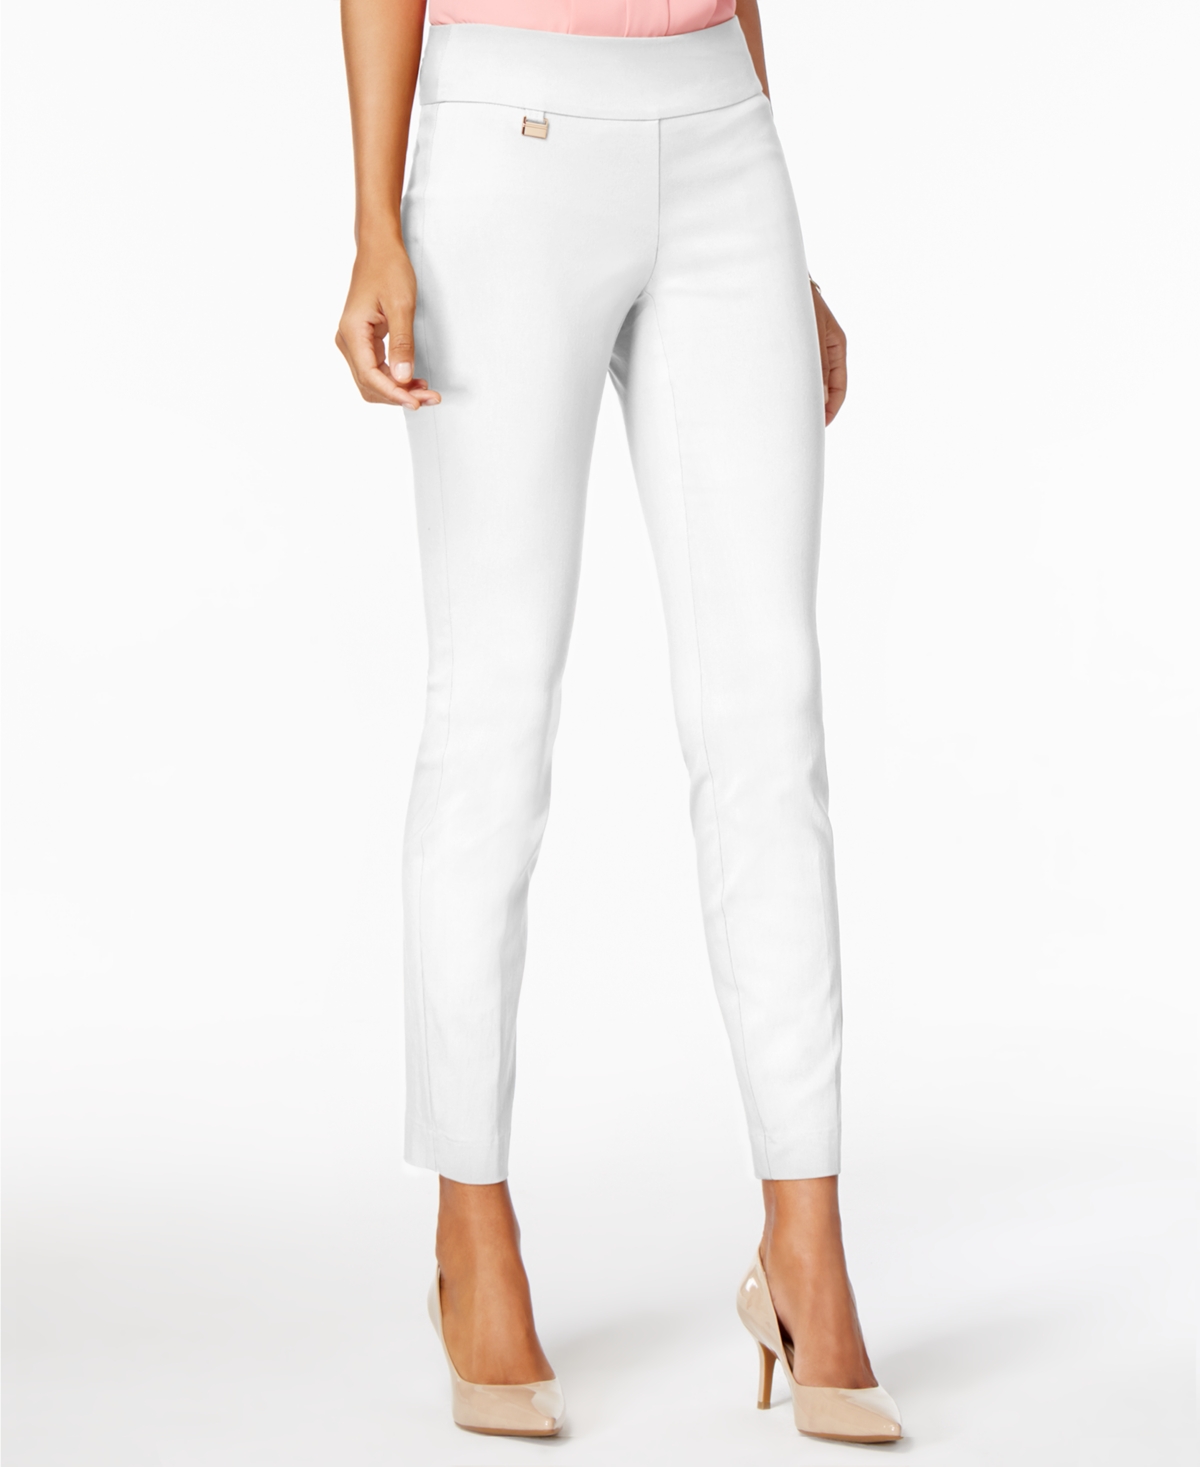 Alfani Women's Tummy-Control Pull-On Skinny Pants, Regular, Short and Long Lengths, Created for Macy's